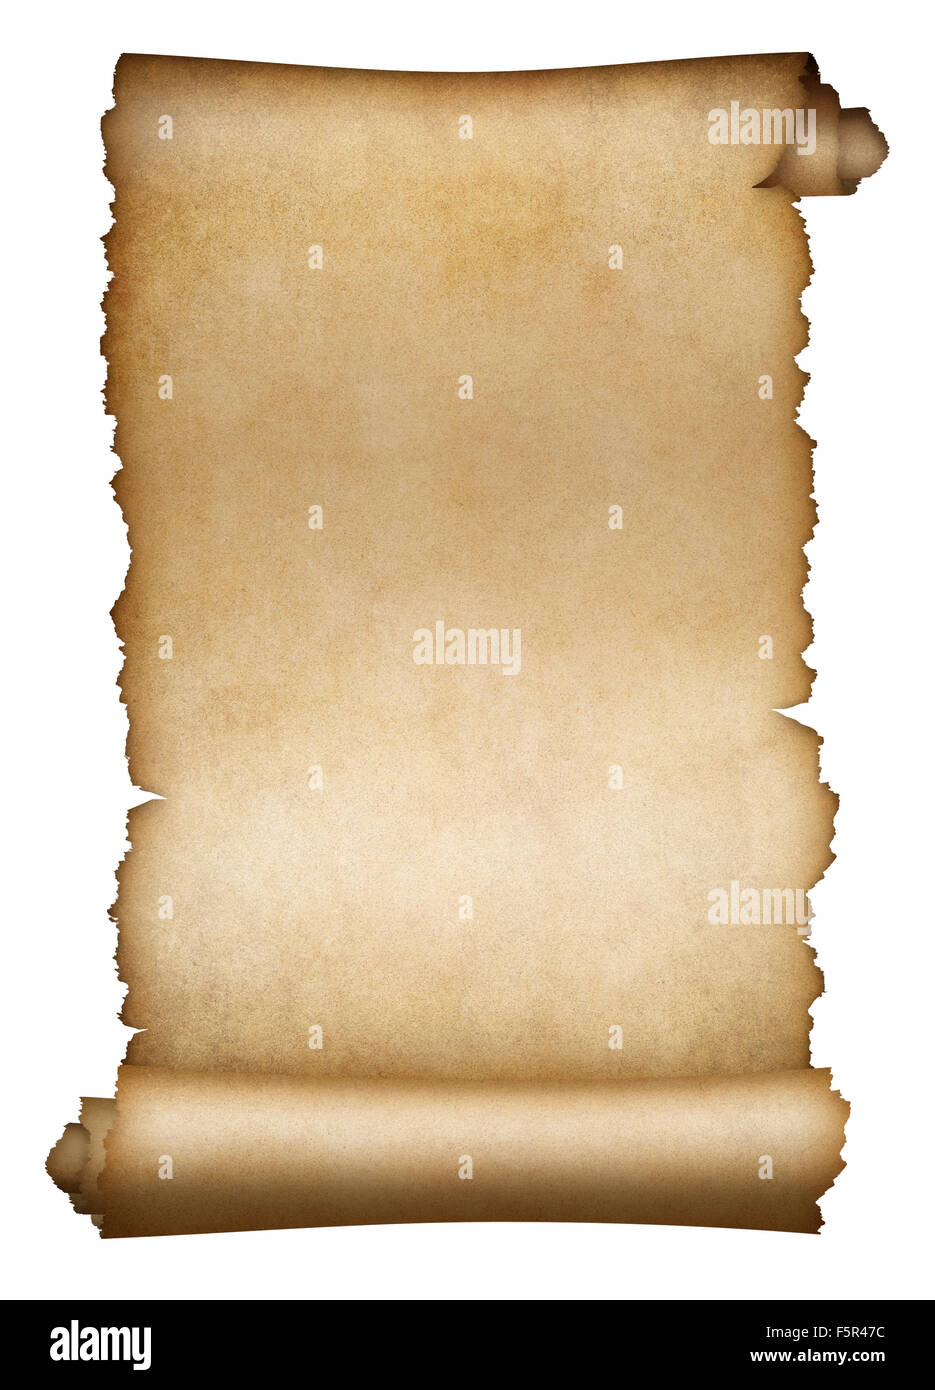 https://c8.alamy.com/comp/F5R47C/old-scroll-parchment-or-paper-isolated-F5R47C.jpg